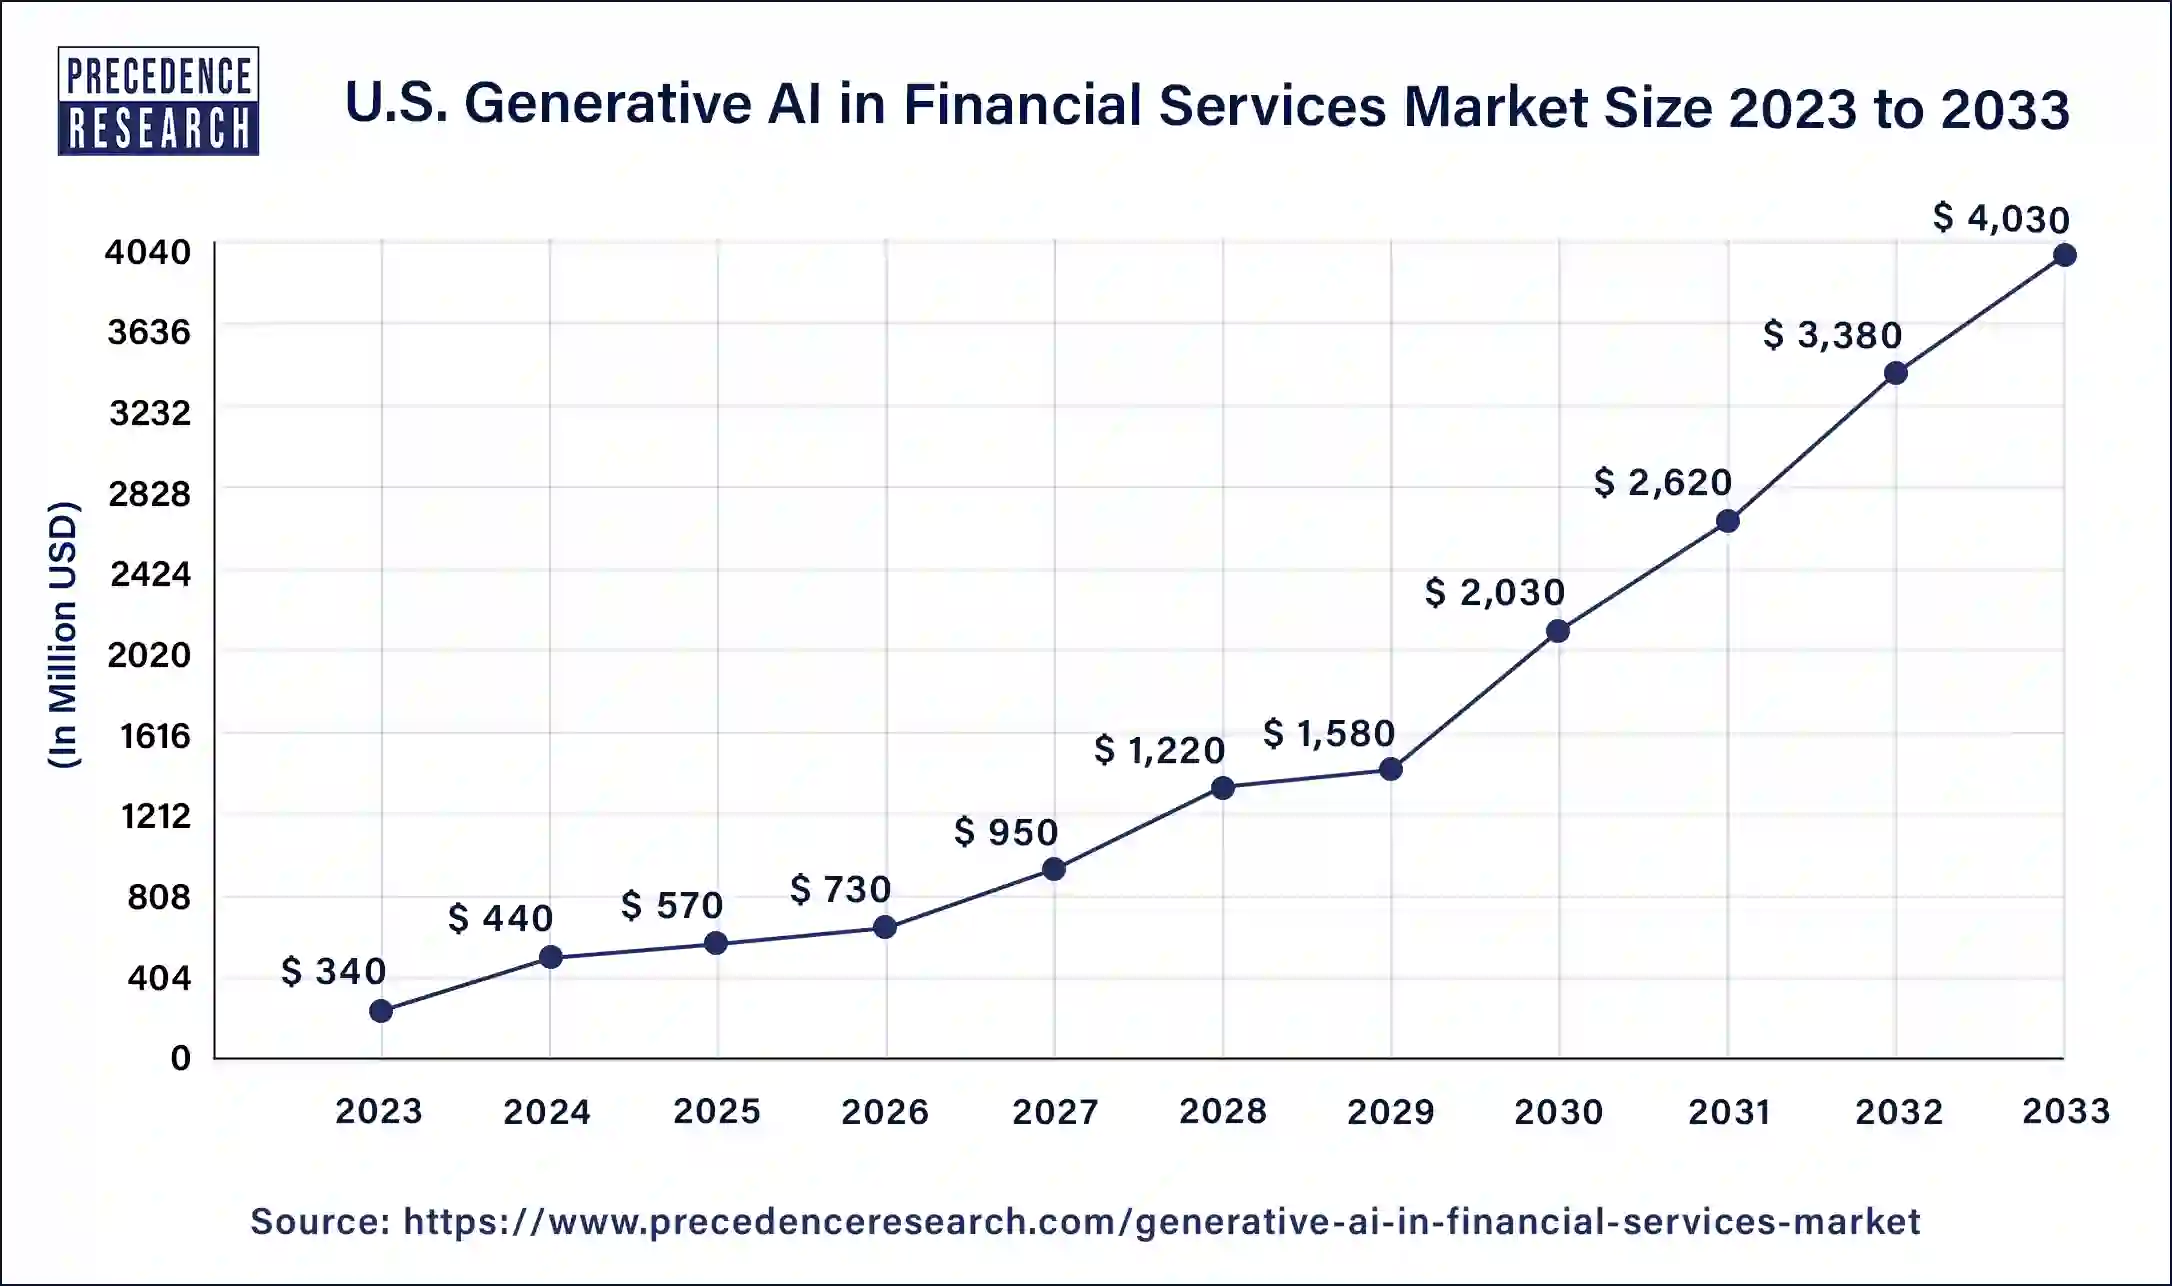 U.S. Generative AI in Financial Services Market Size 2024 to 2033